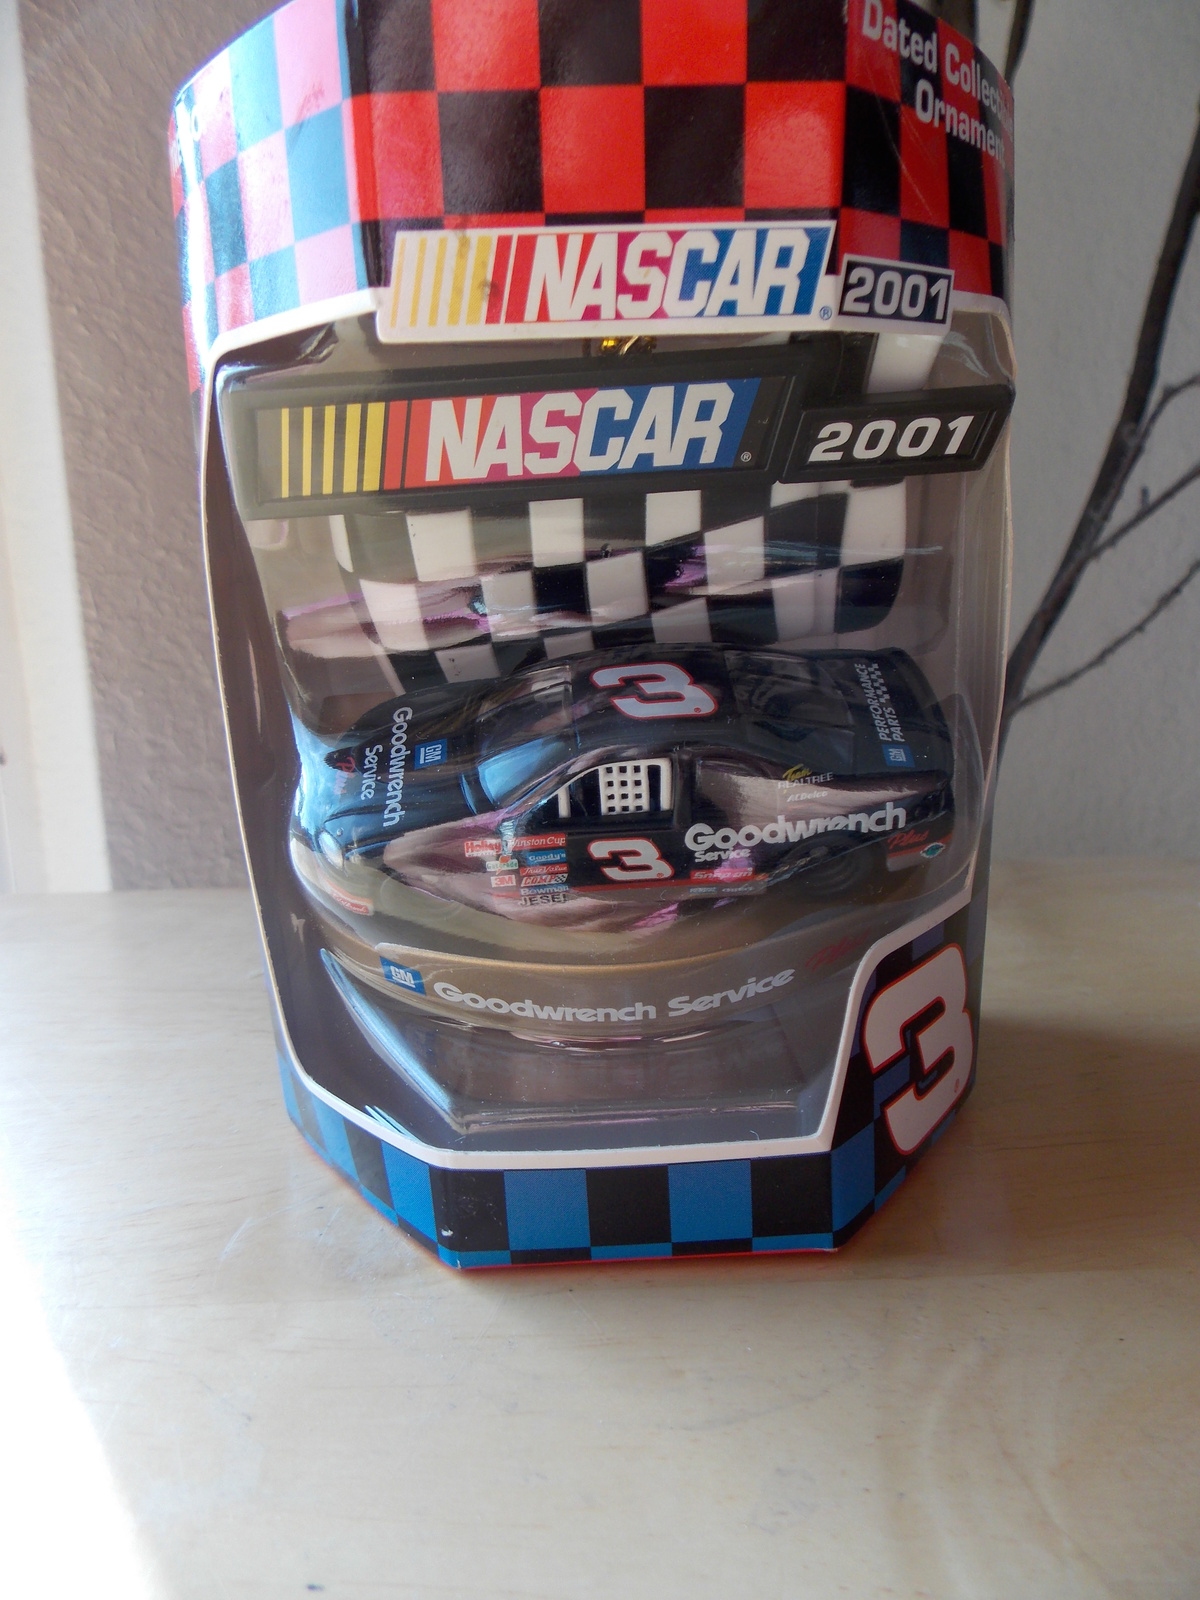 Dale Earnhardt #3 2001 Nascar Dated Collectible Ornament  - $20.00